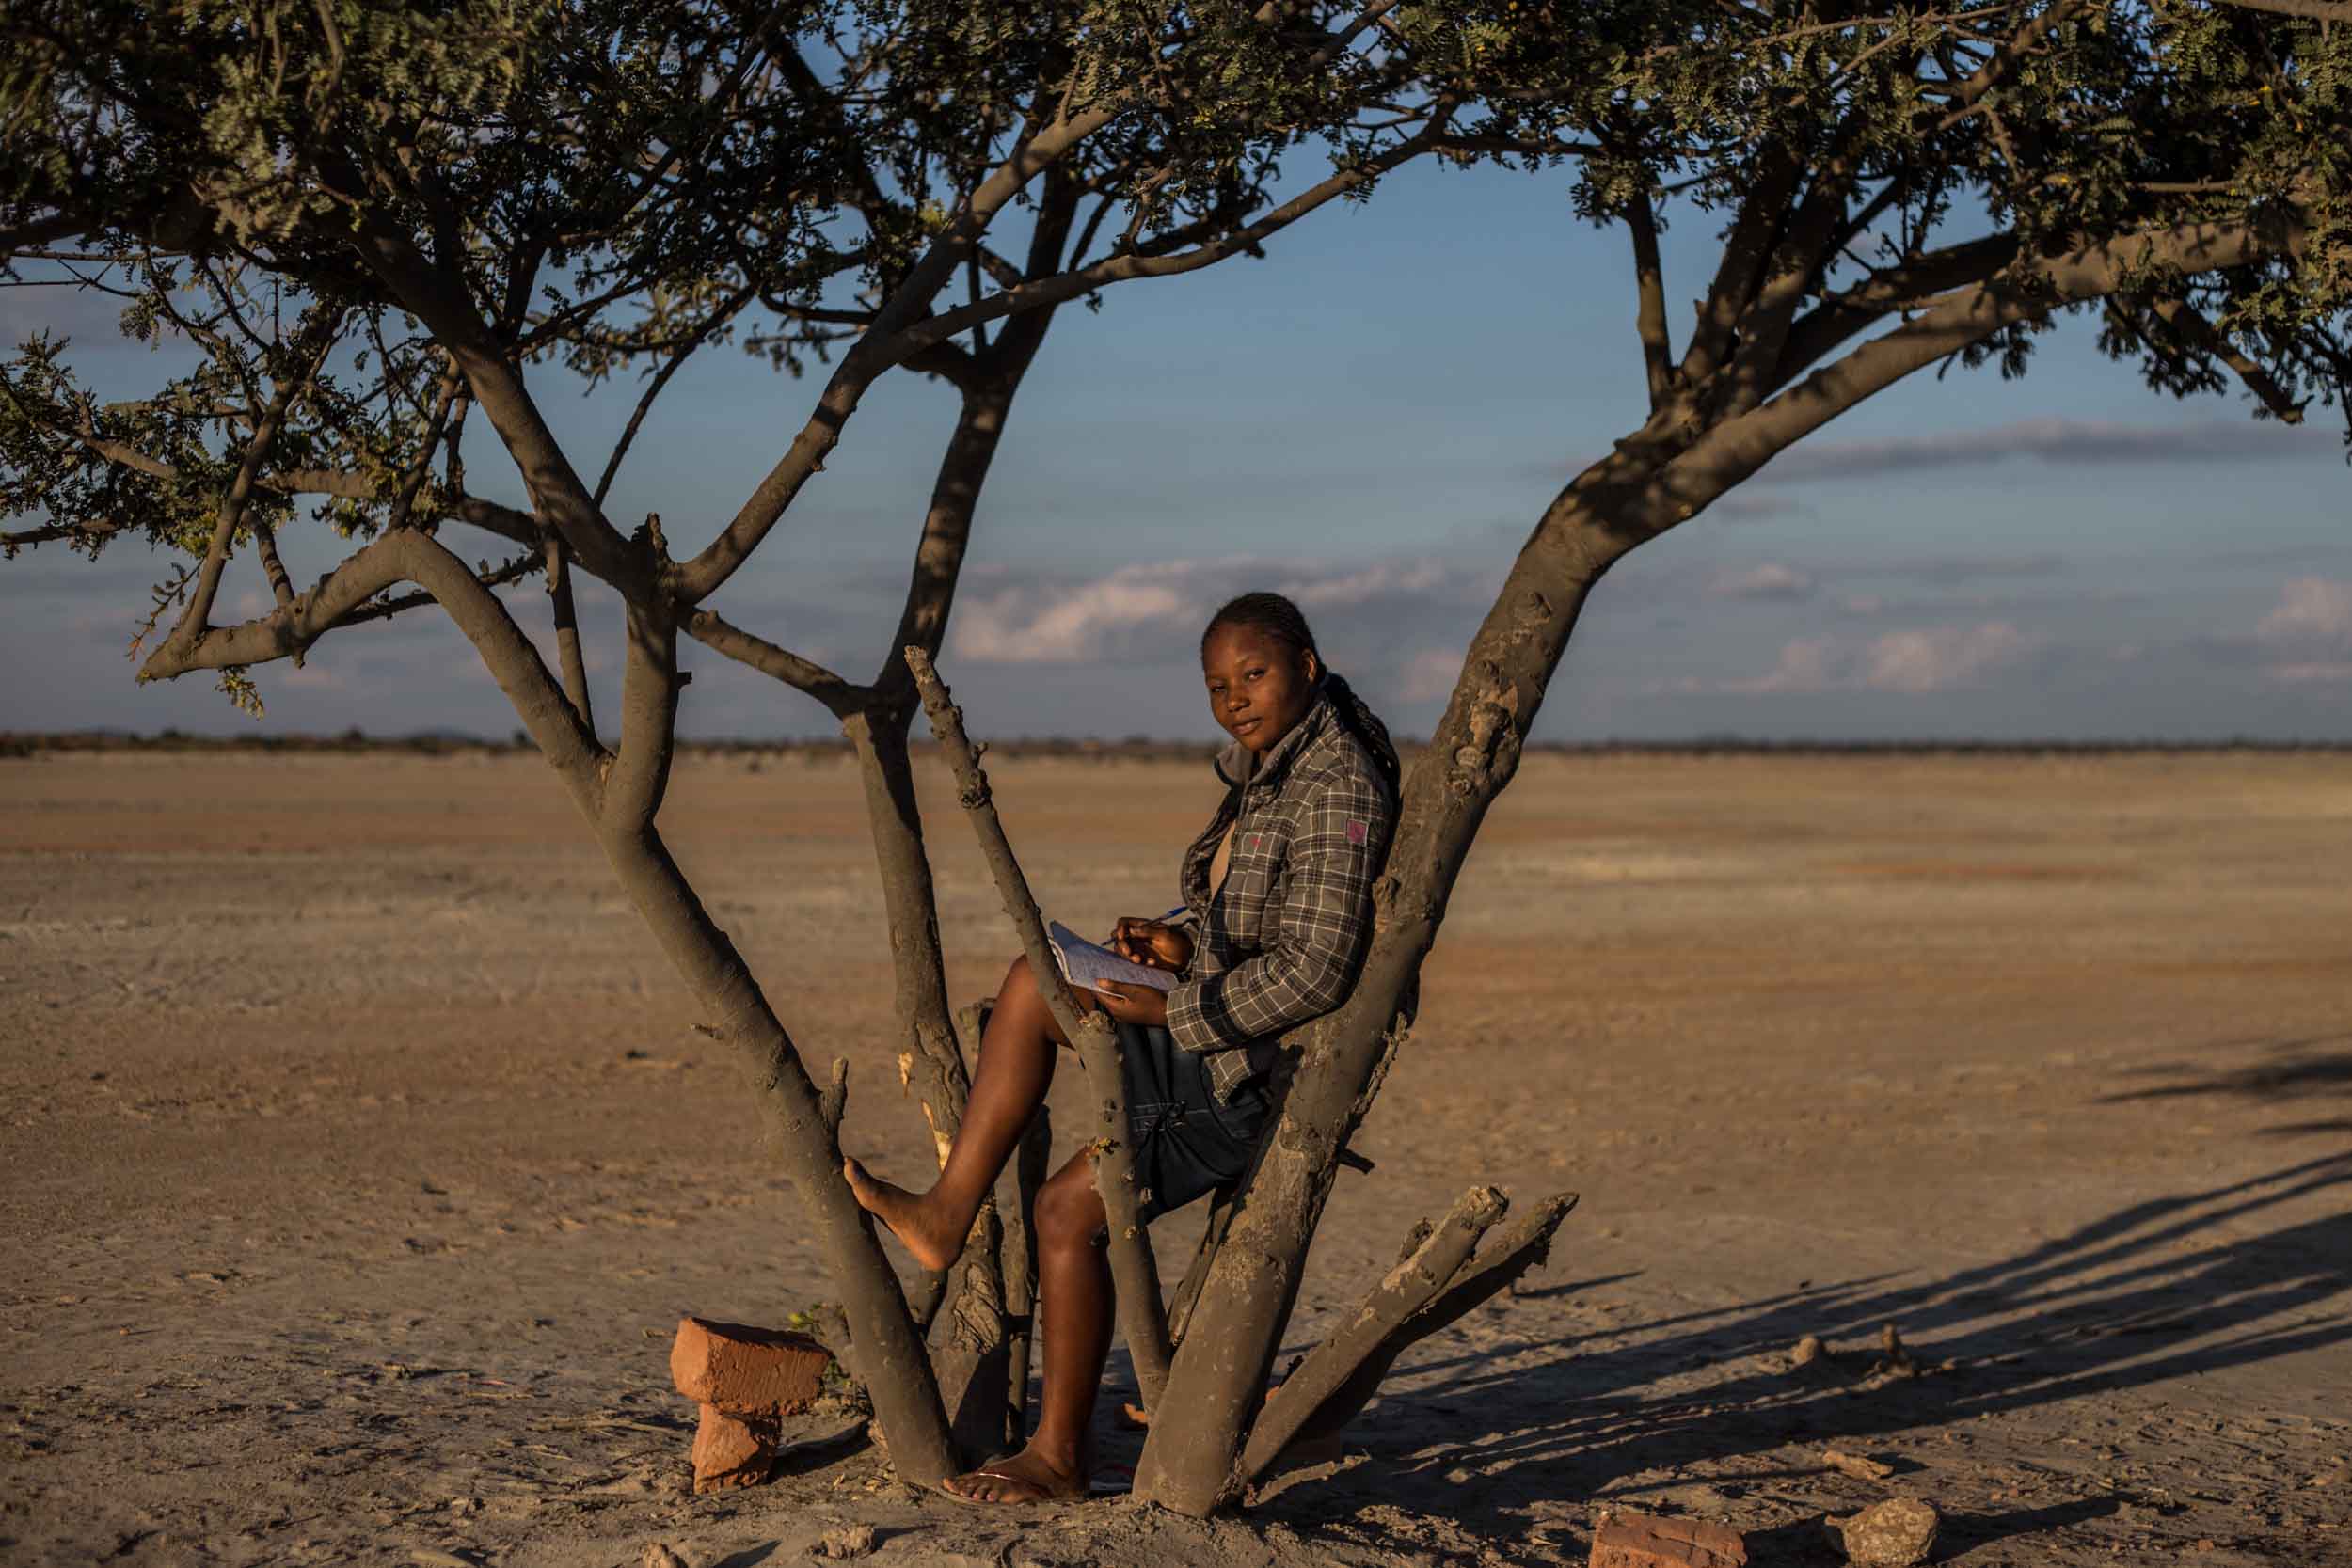  Benitha, 16, comes to study in the toxic desert of Kipushi. “It’s a quiet place and it helps me to concentrate”, she explains. 